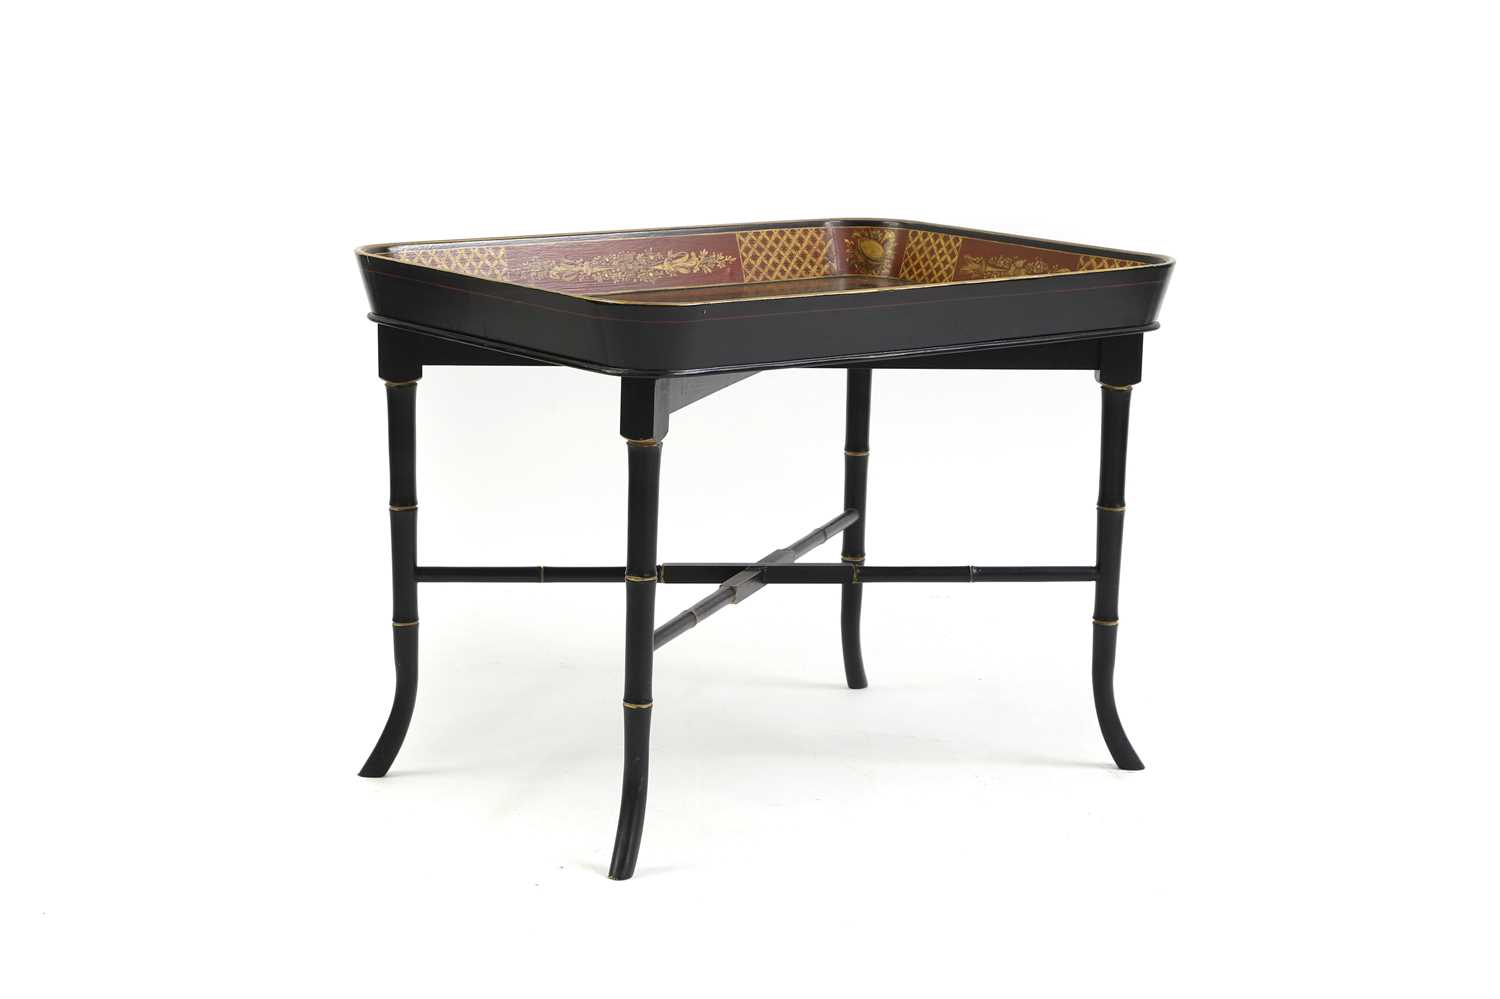 A Regency-style ebonised and parcel-gilt tray table, - Image 2 of 3